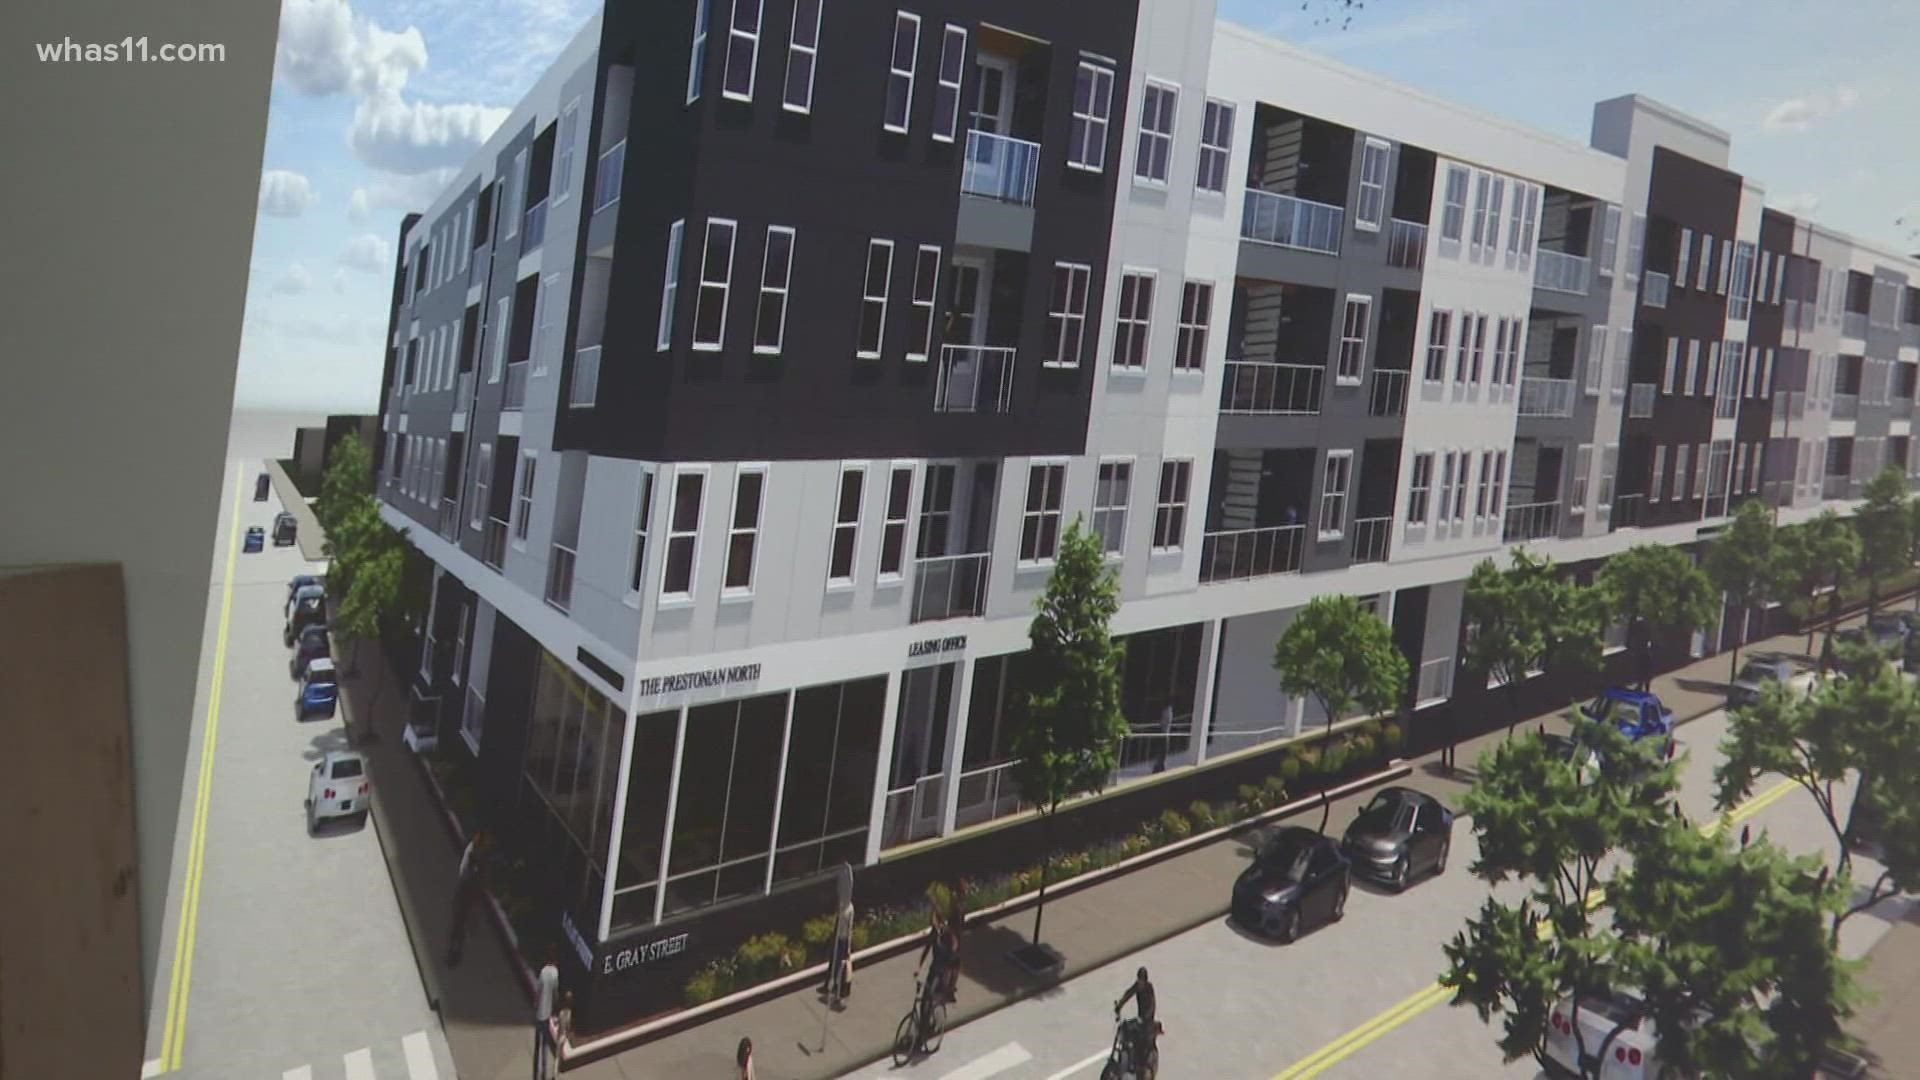 LDG said they will address the housing need in Louisville with 10 new developments dedicated to affordable and mixed-income housing.